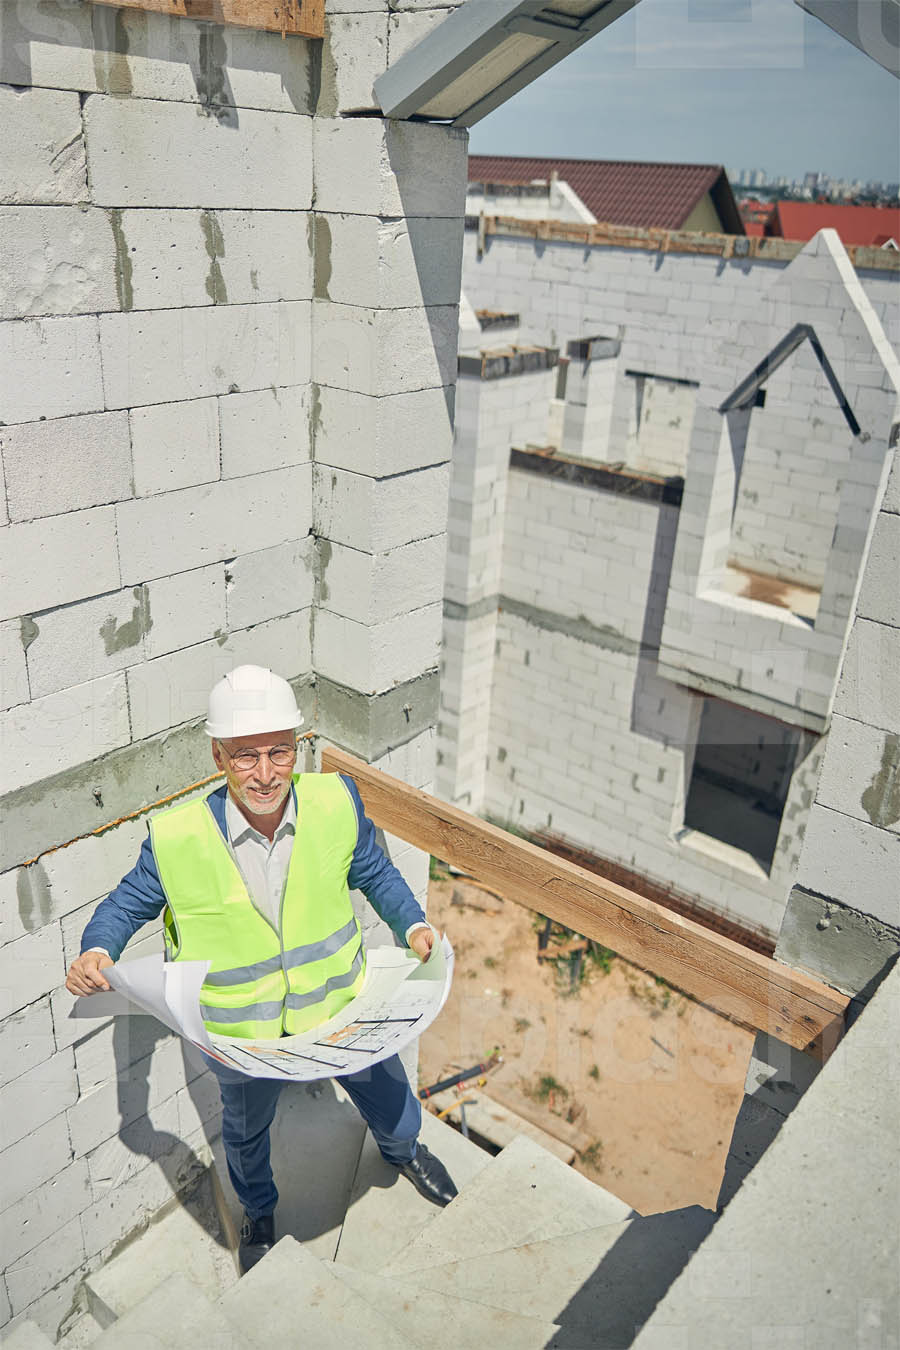 A construction professional reads plans in the sun. See Truewerk’s heat facts sheet for critical heat safety tips.